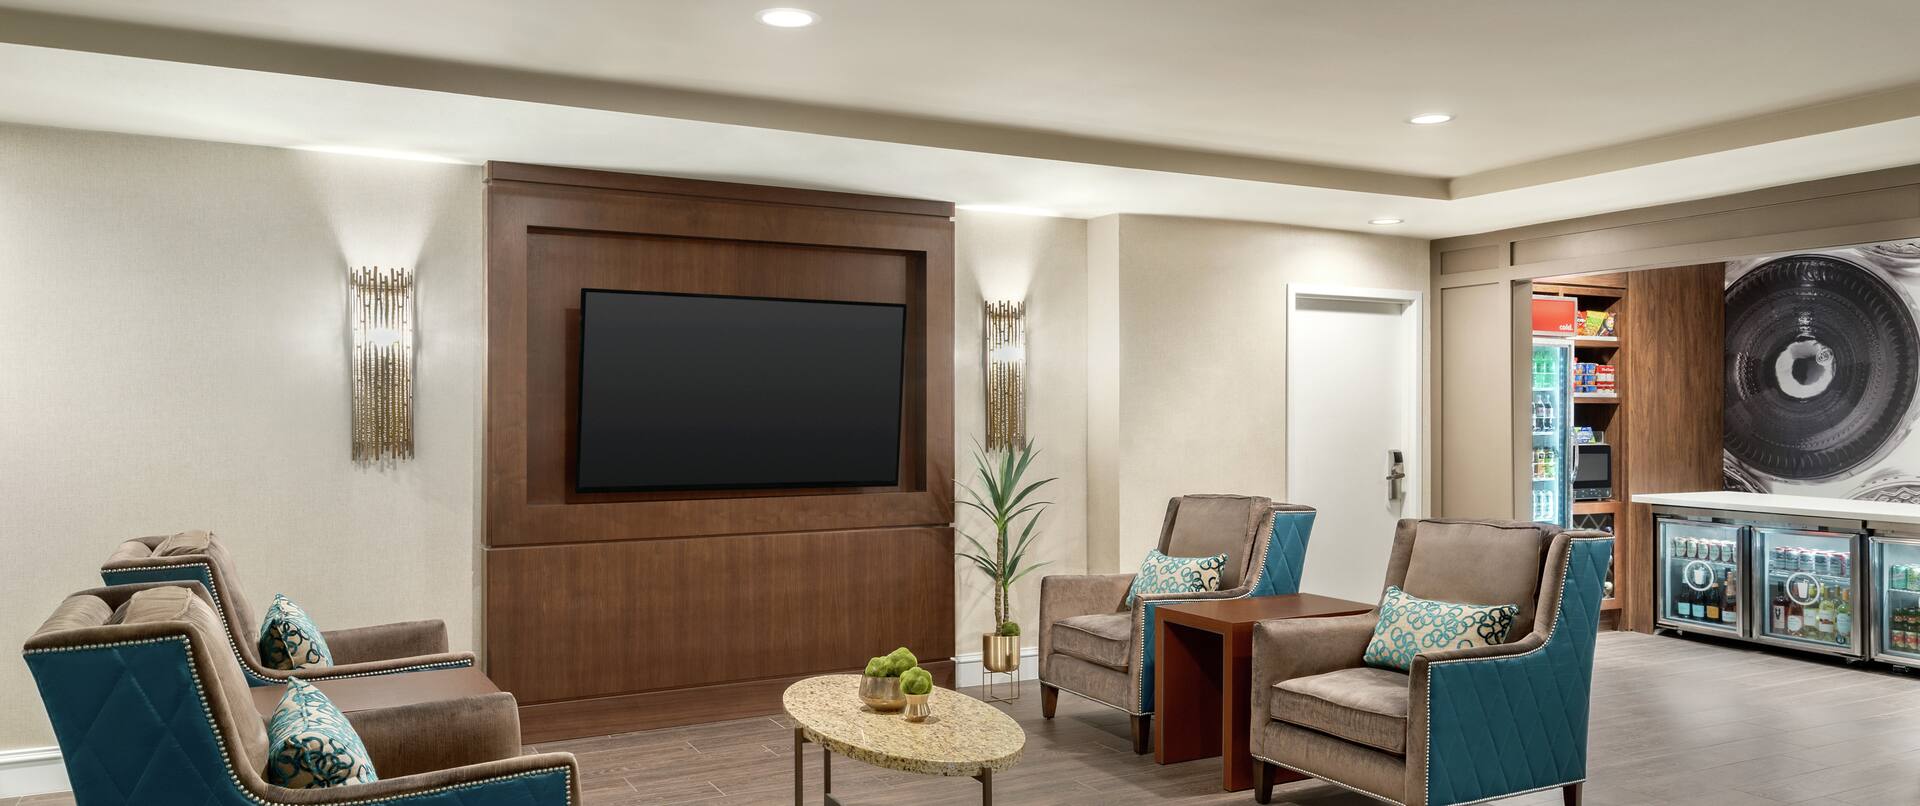 Spacious hotel lobby featuring seating area with TV and convenient on-site market.